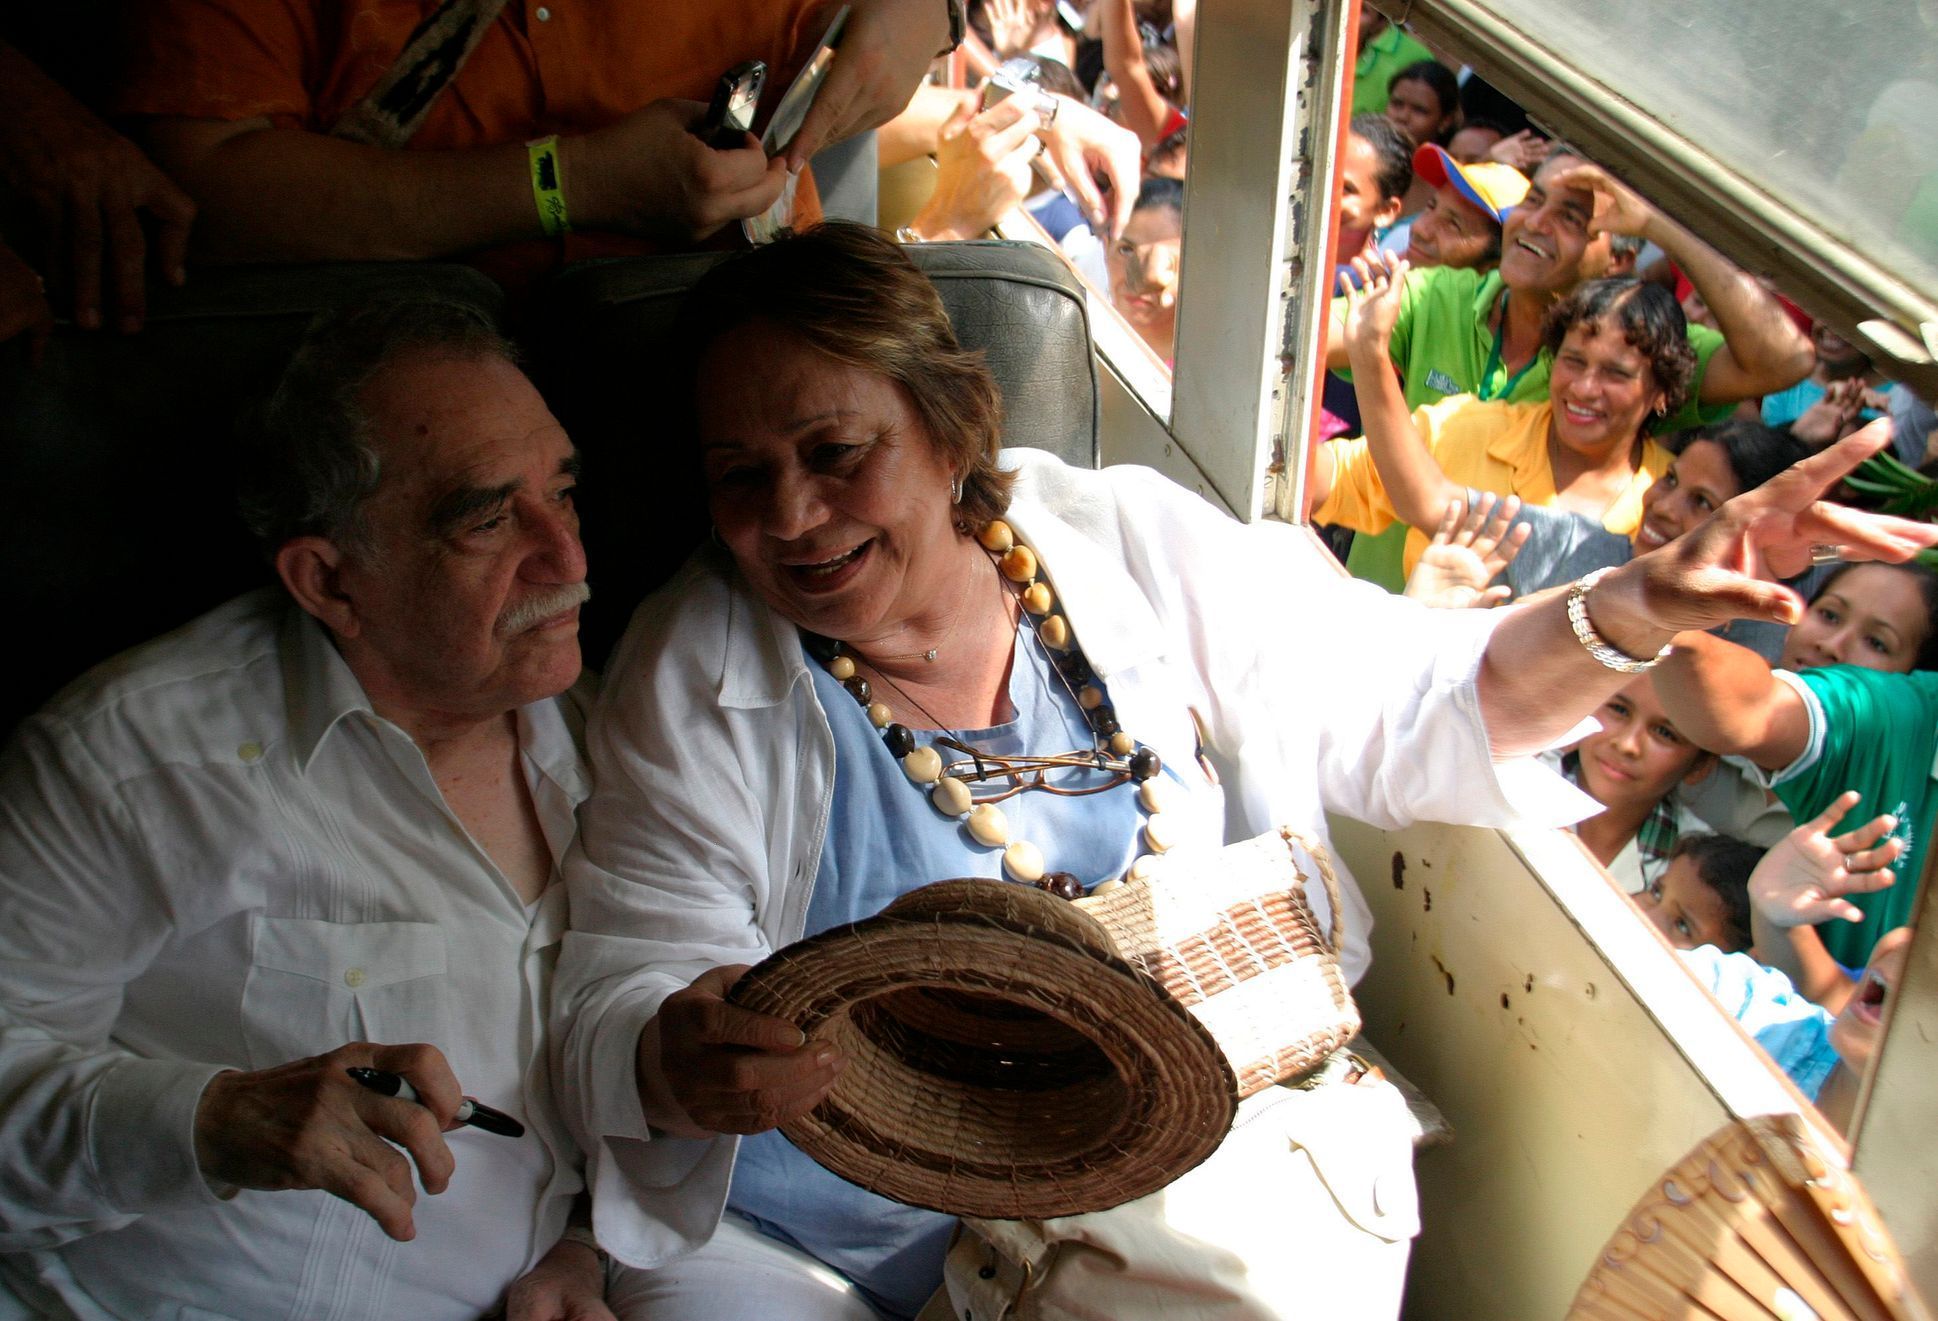 File photo shows Garcia Marquez speaking with his wife Mercedes after their arrival in Aracataca